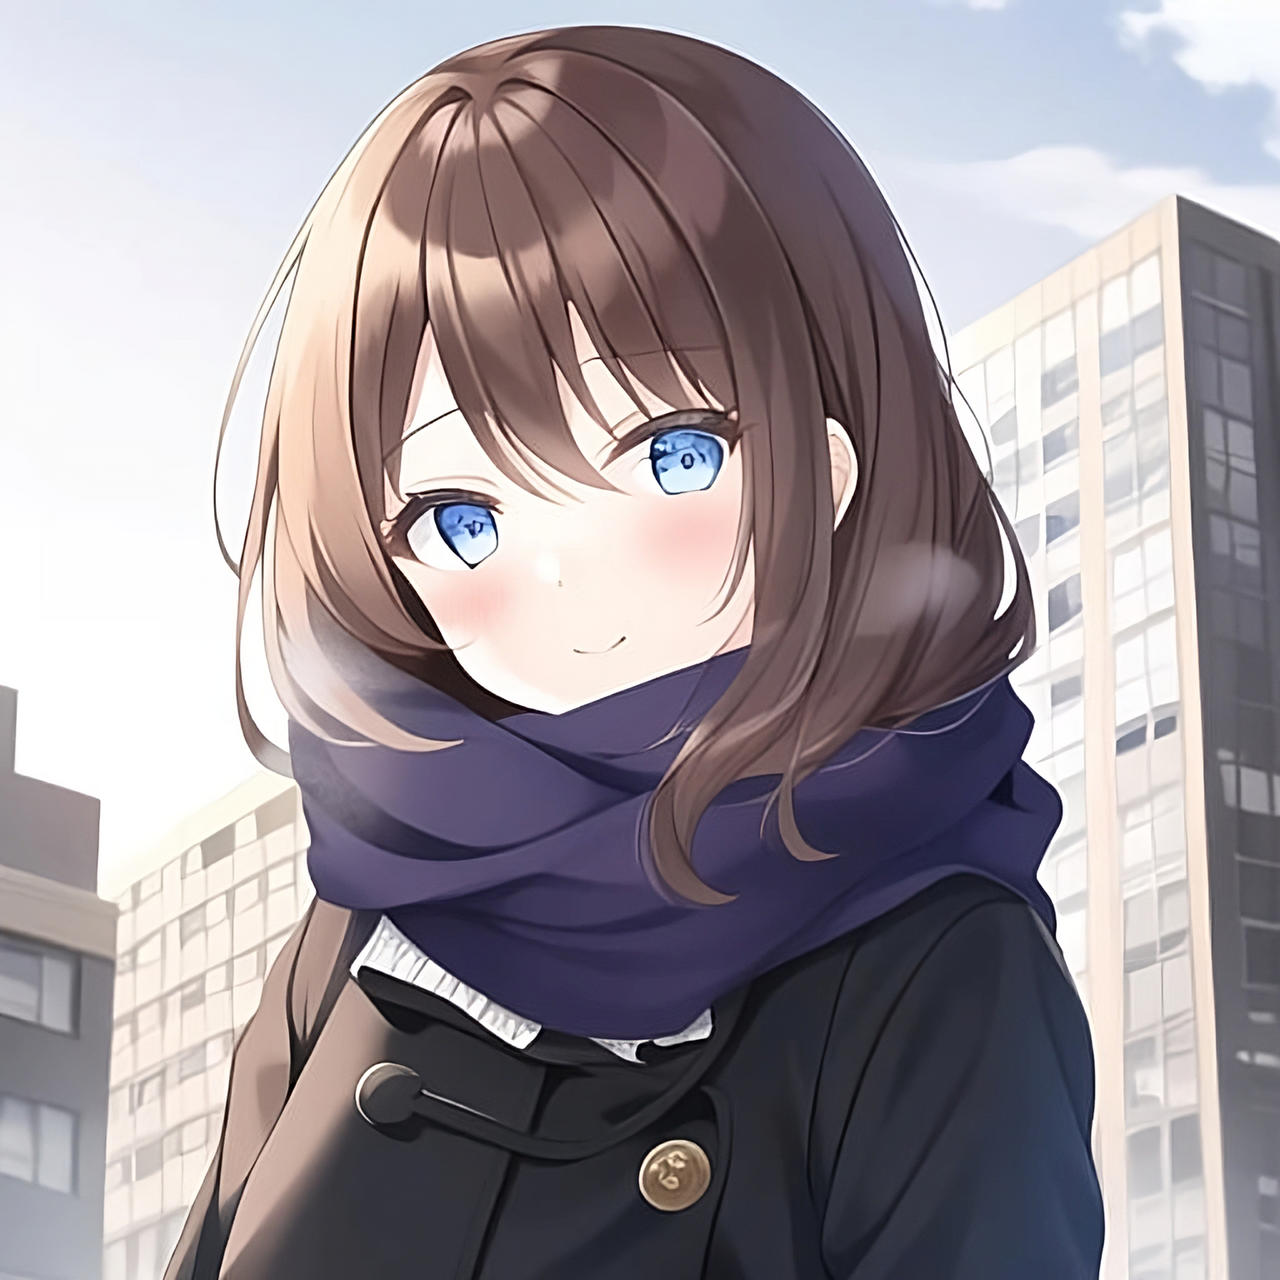 An anime girl that has brown hair and blue eyes next